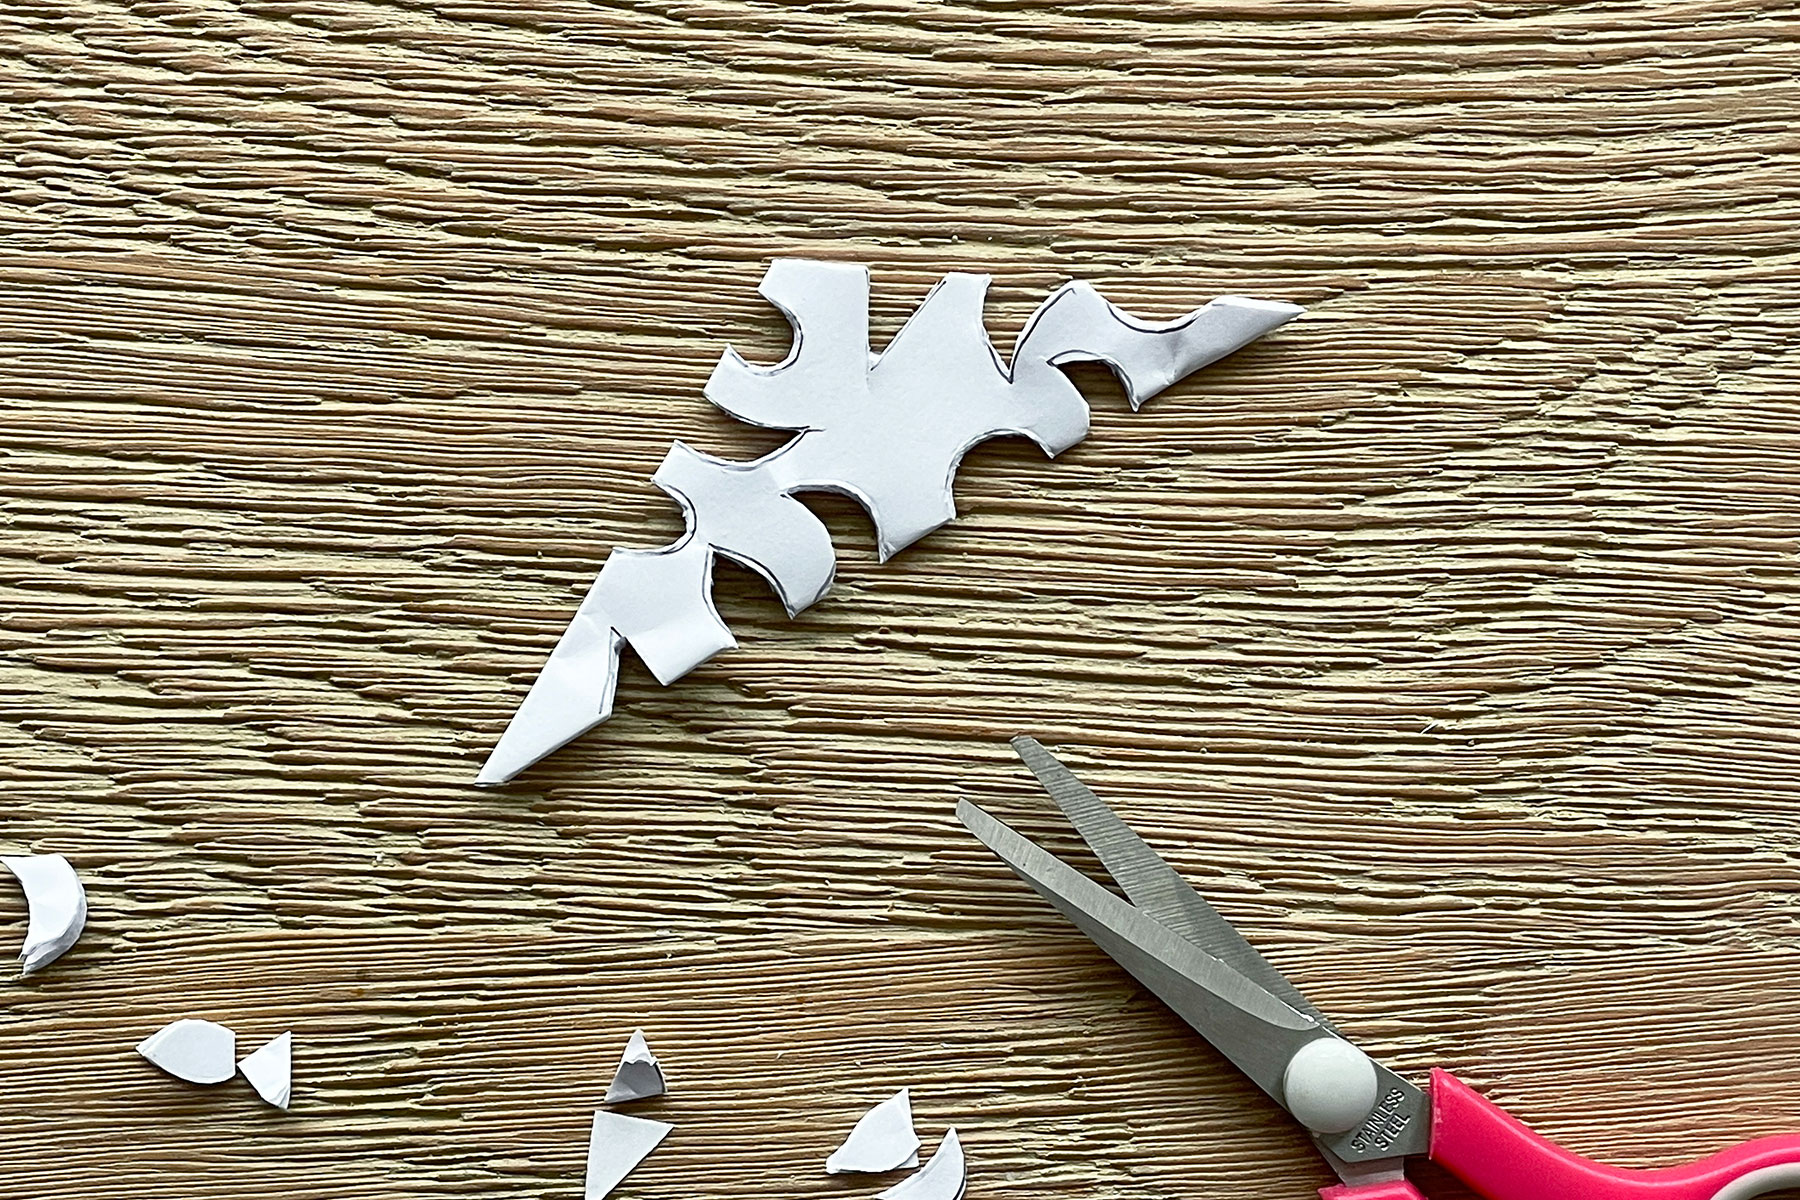 A photo of the triangle piece of paper with little shapes cut out of it with some scissors